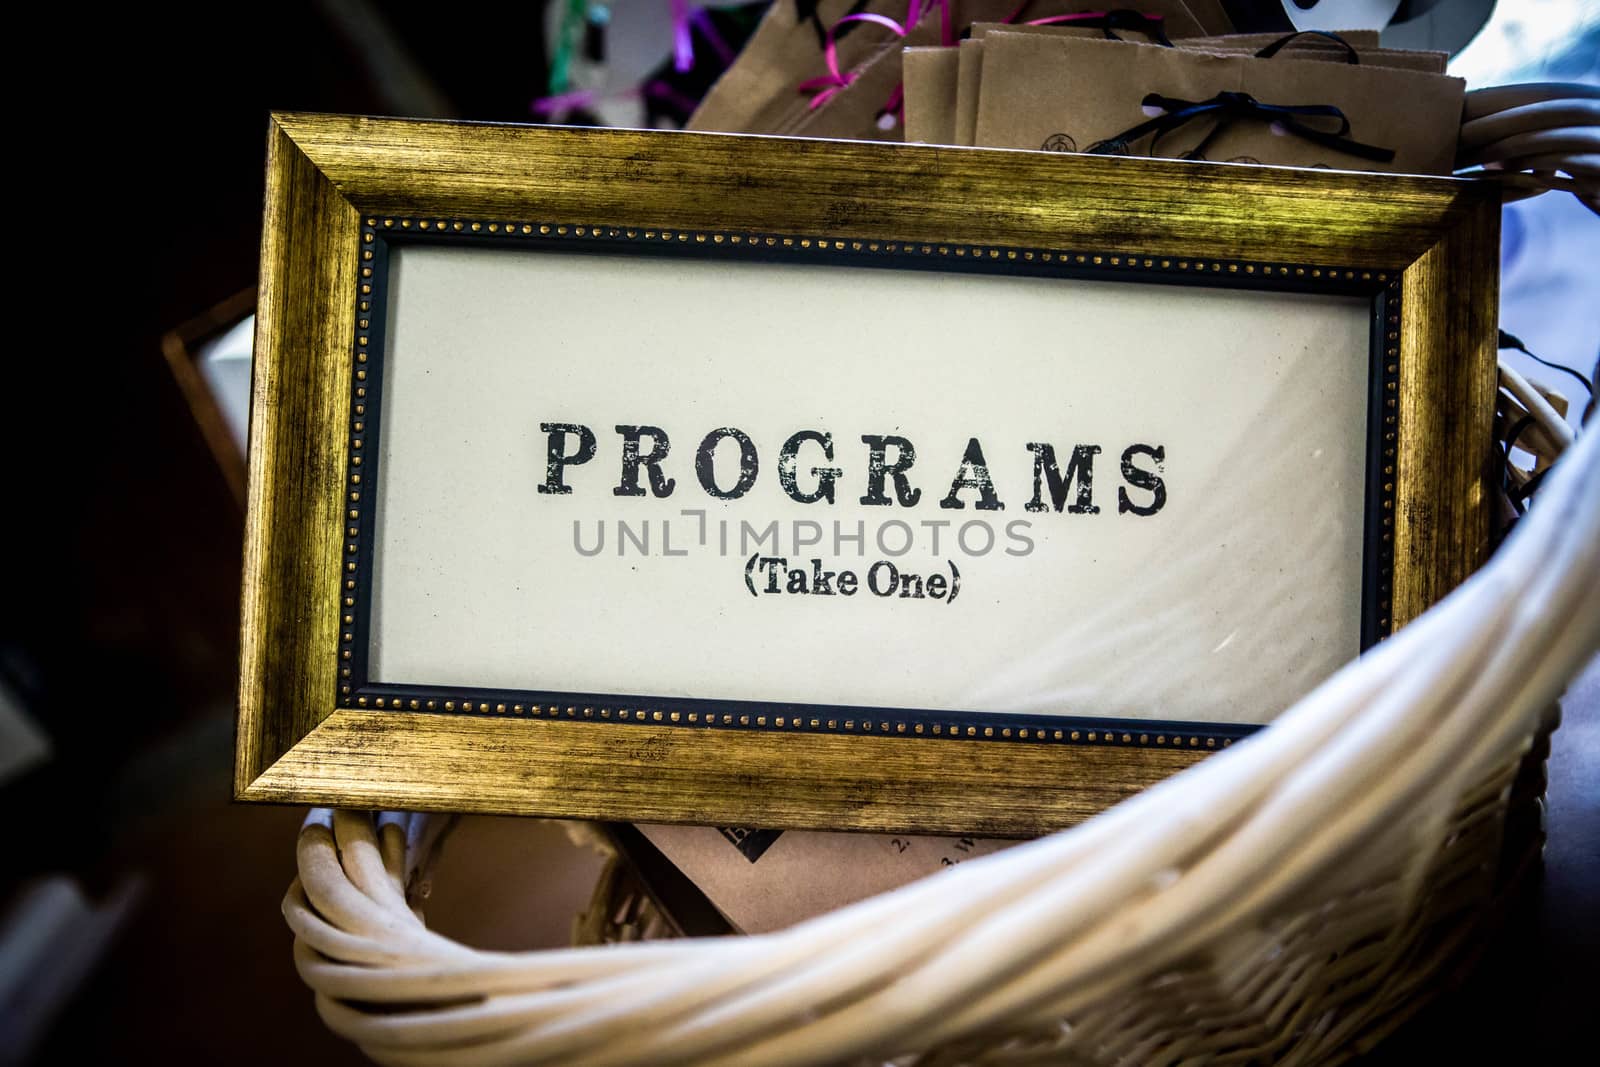 Rustic, retro, chic, or old sign used at a wedding or theater performance to hand out programs.